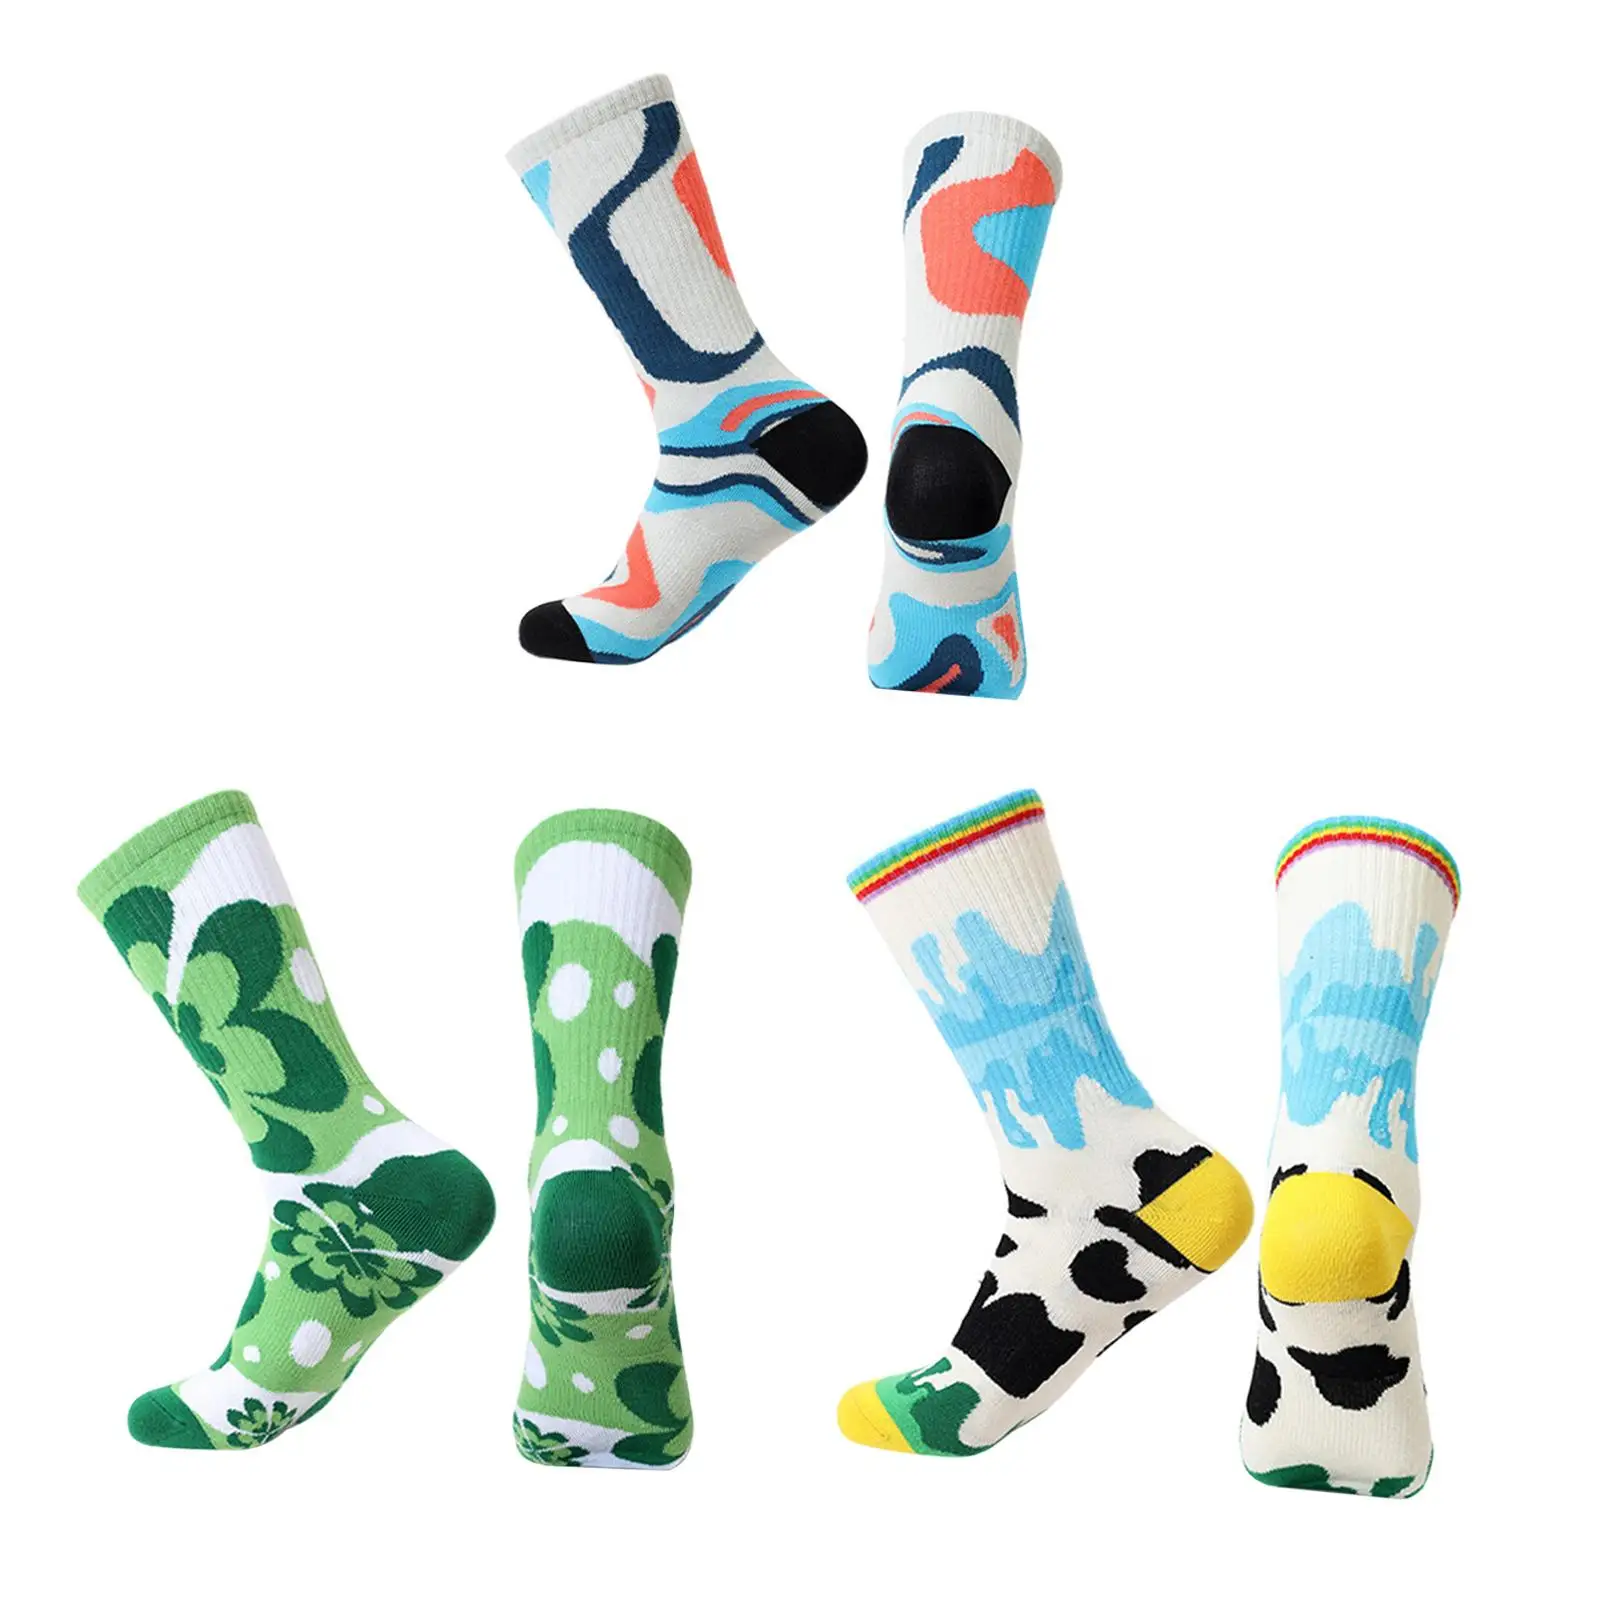 Colorful Patterned Crew Socks Novelty Casual Fashionable Dress Socks for Cycling